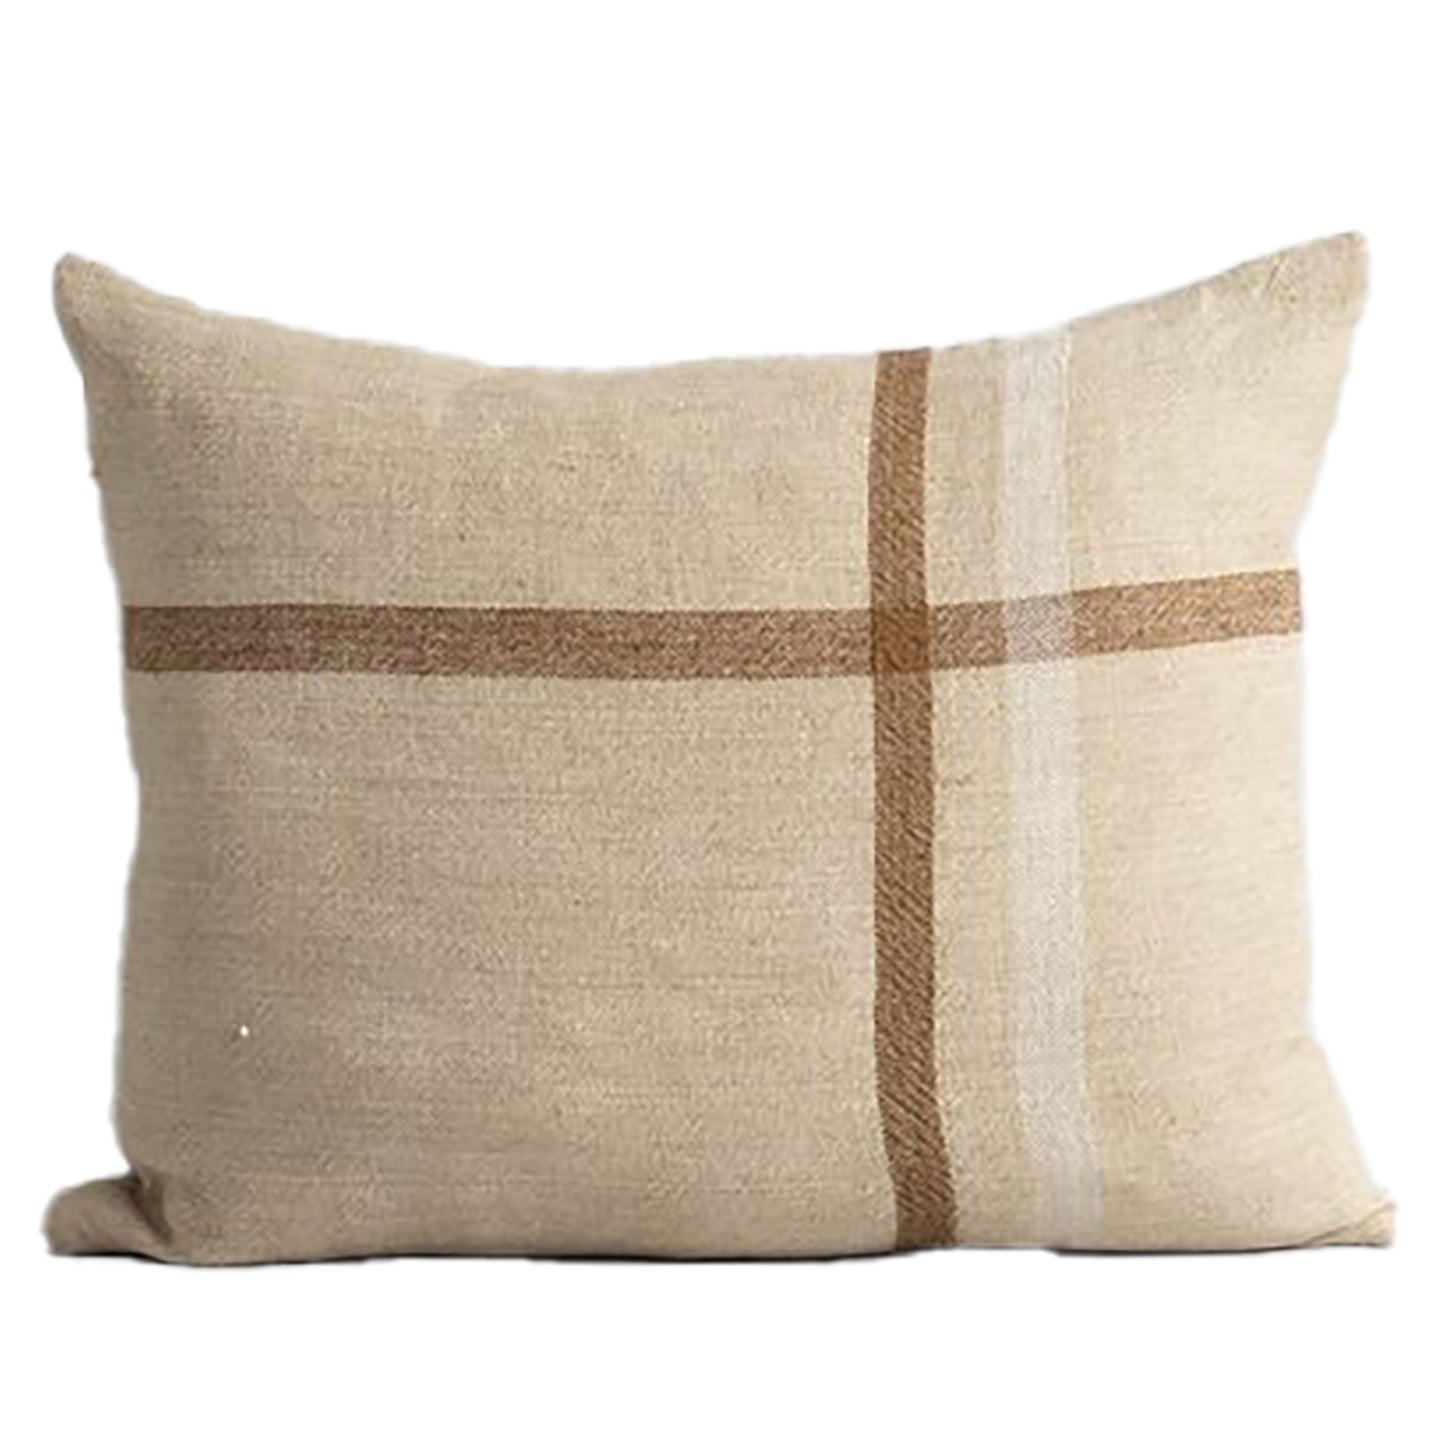 Clintock linen cushion cover taupe 45 x 55cm